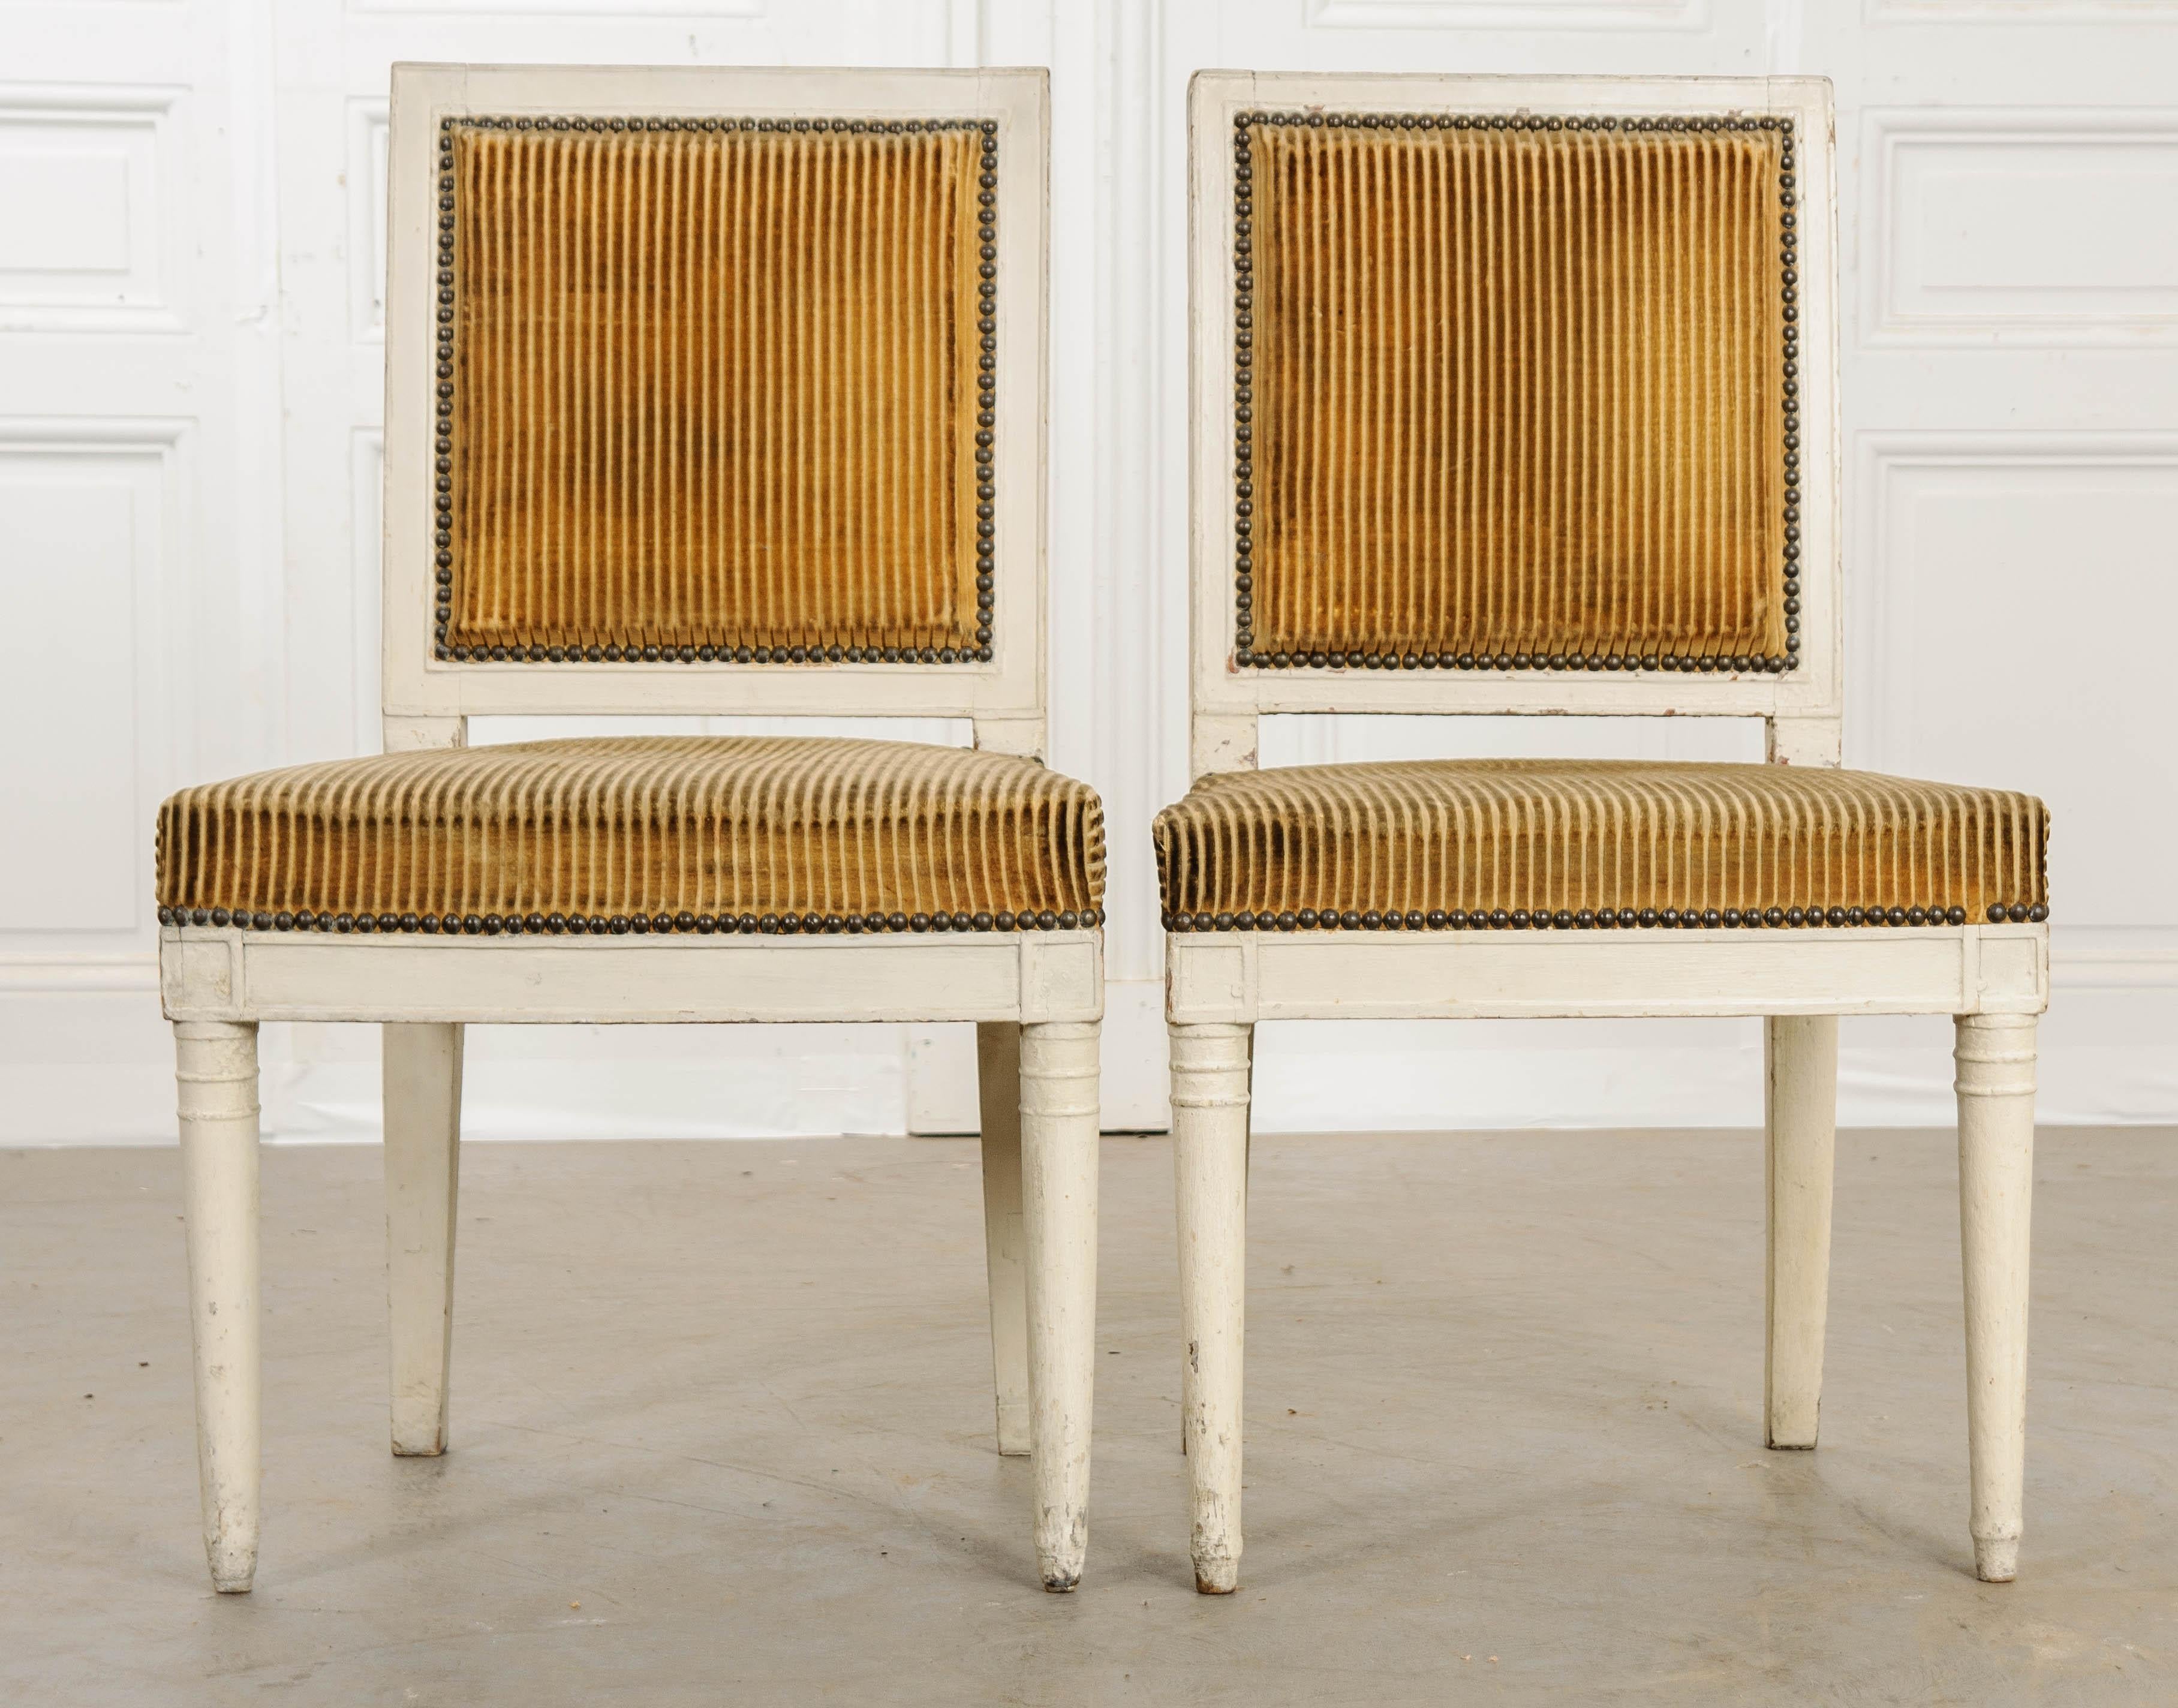 A remarkable pair of period Directoire chairs, upholstered in cut velvet, from 18th century France. Each chair has had their front legs turned in the Directoire style and painted an ivory color that has taken an antiqued patina over the years. The